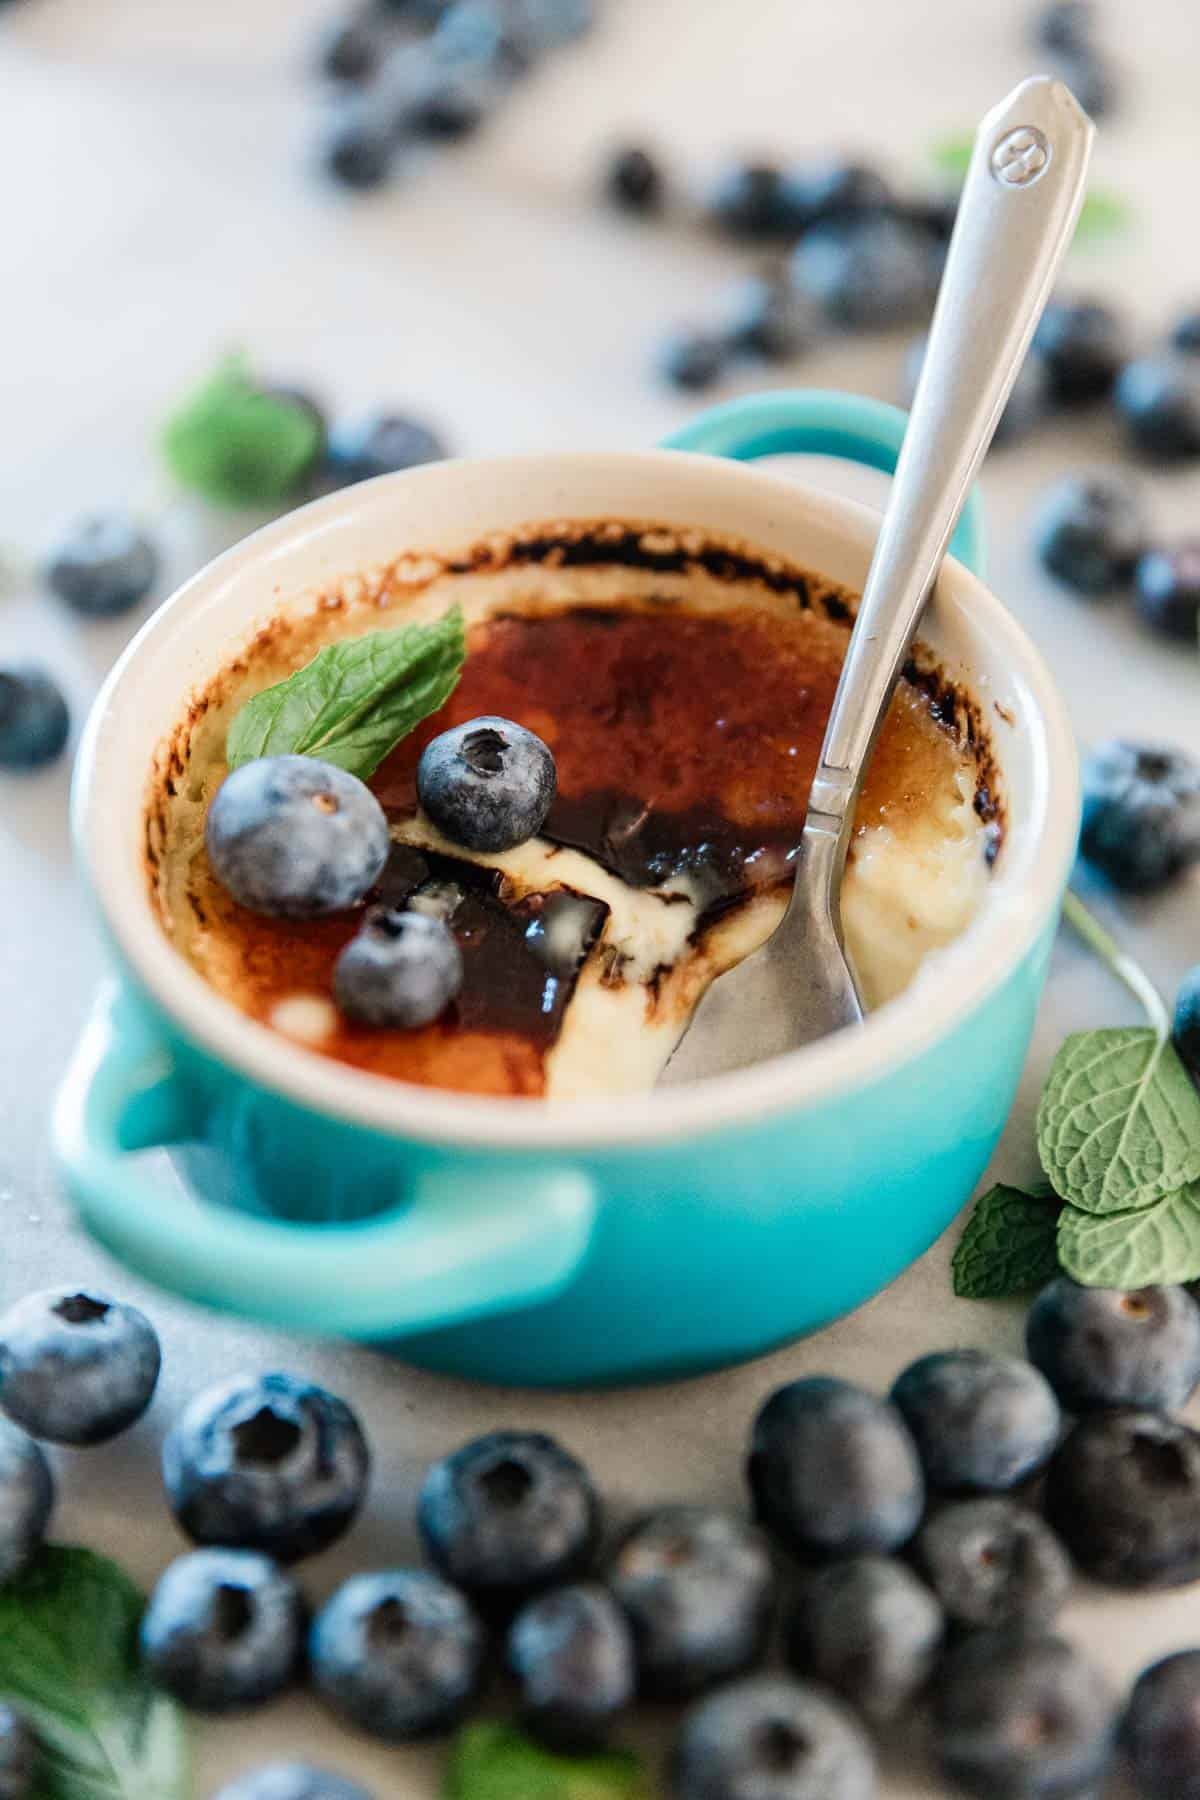 Creme brûlée in a blue ramekin. There are blueberries scattered around.